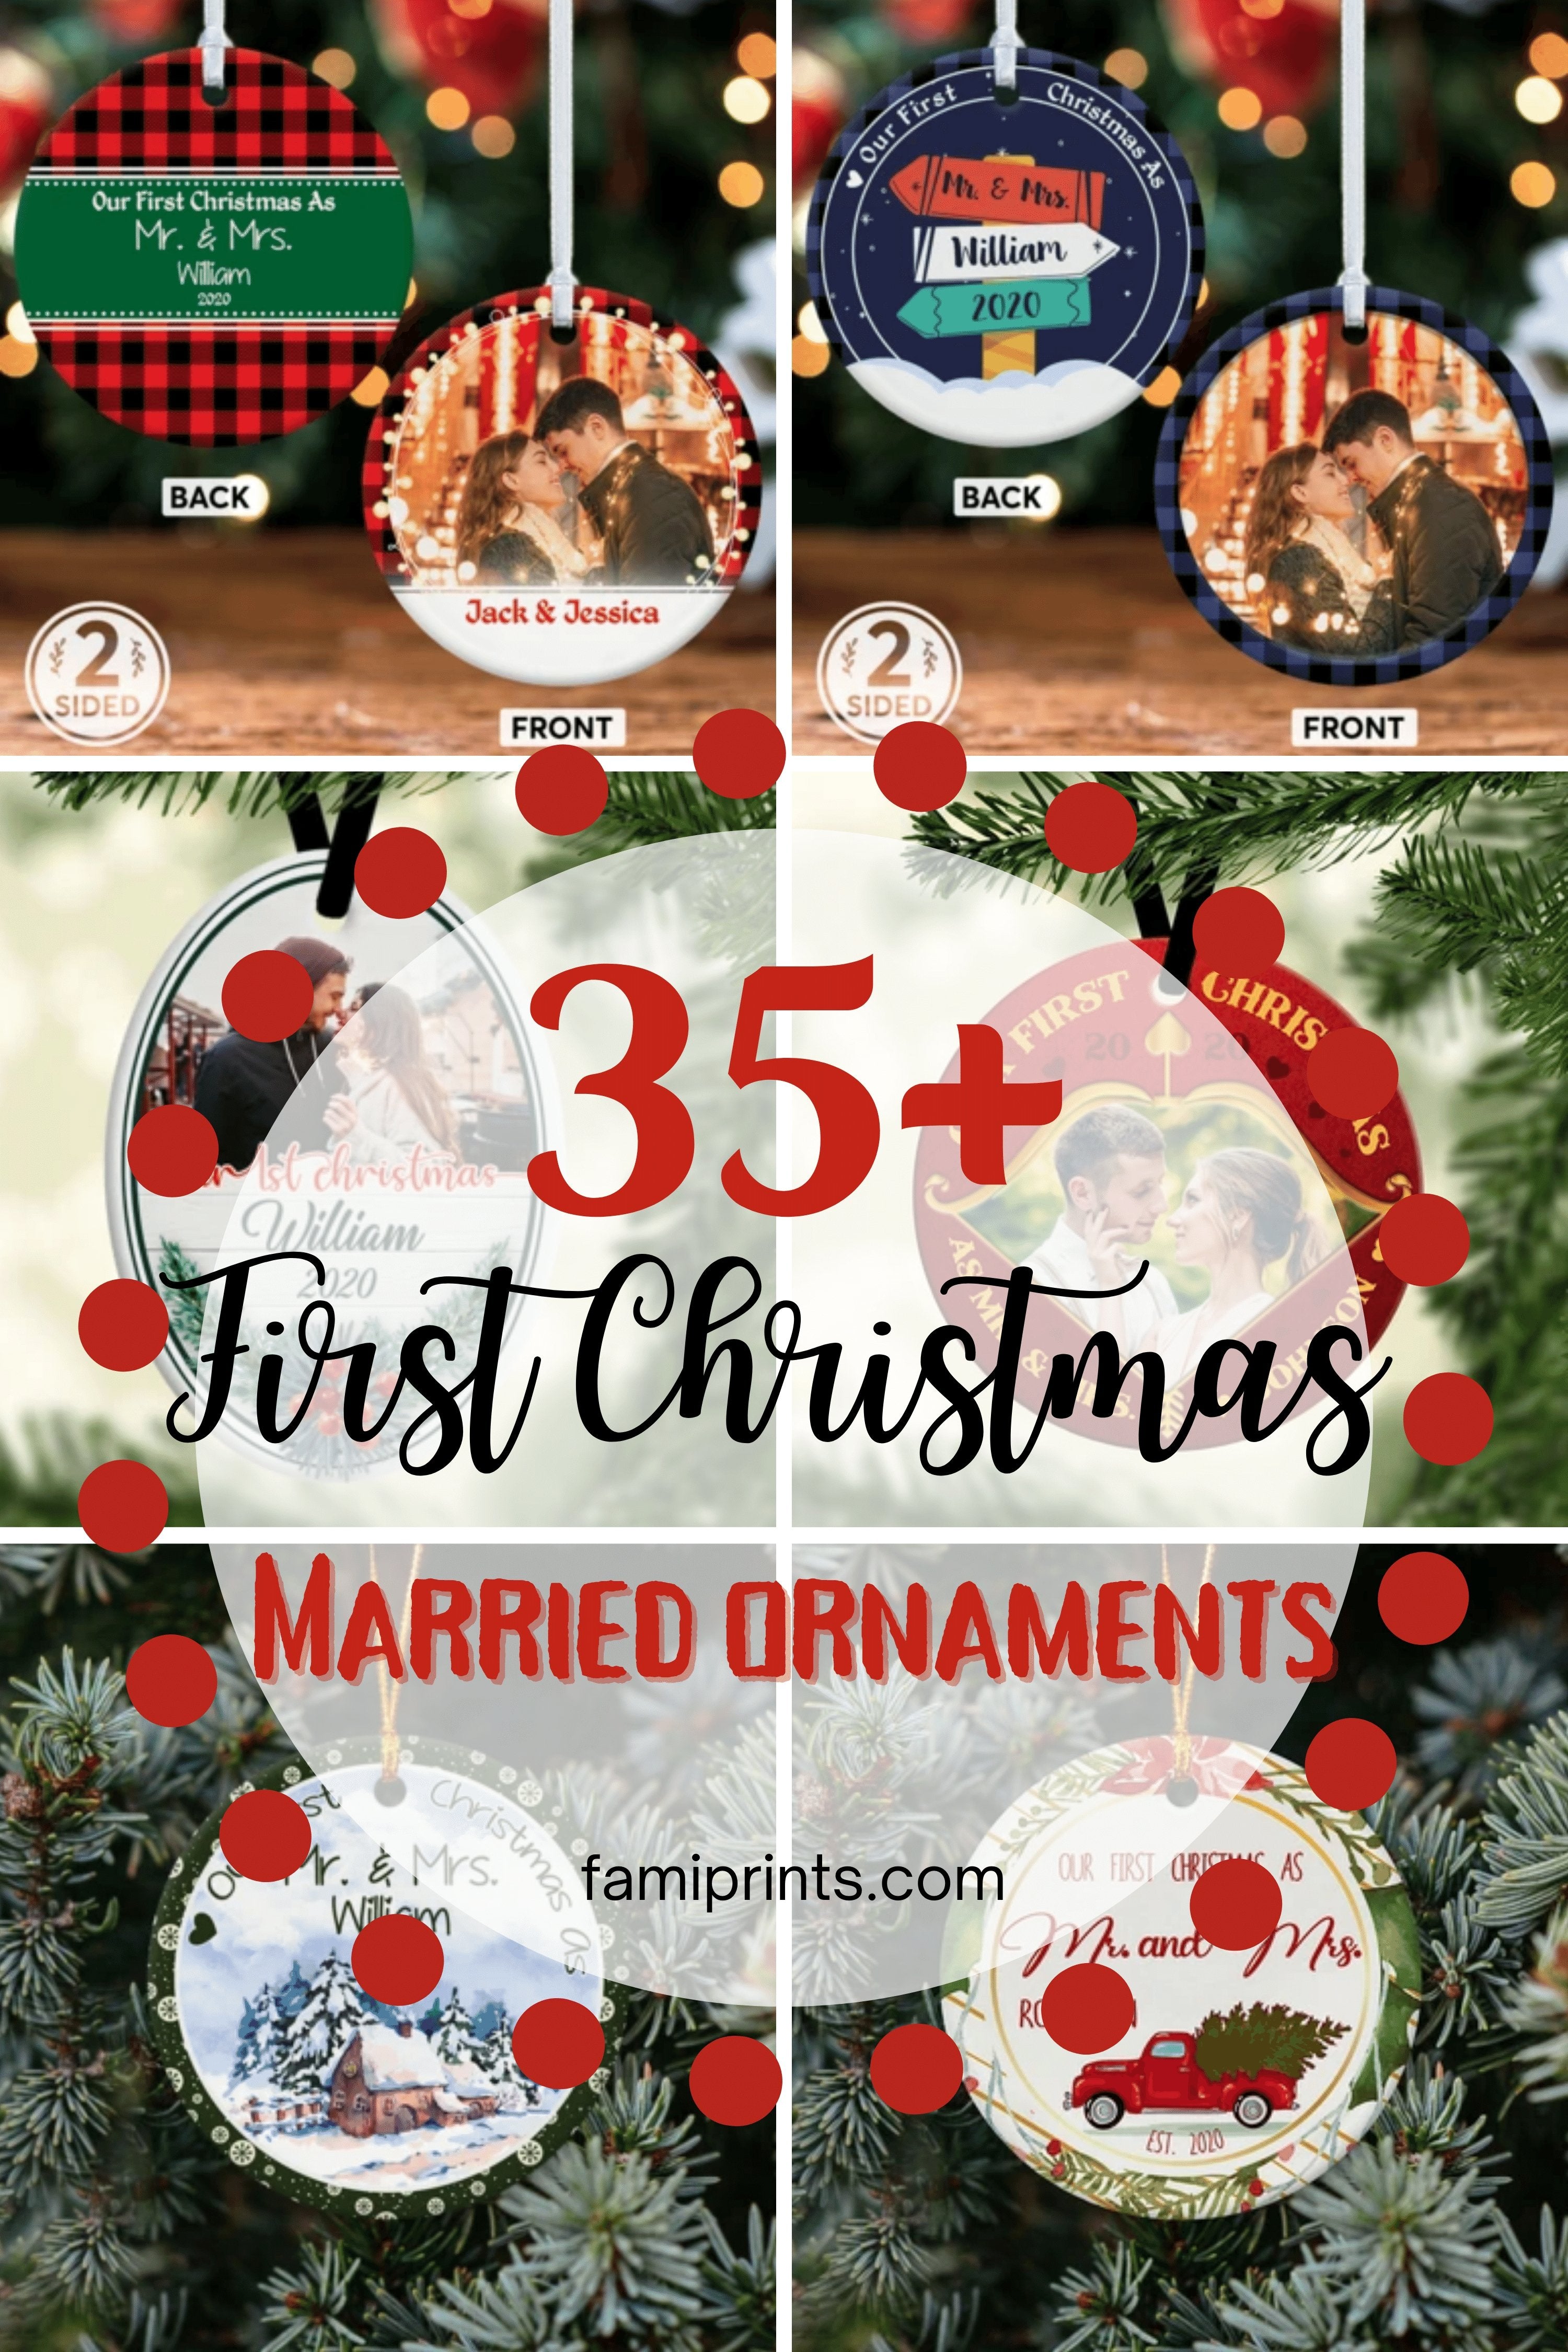 First Christmas Married Ornaments For Newlyweds | FamiPrints | Trending Personalized Family Gifts